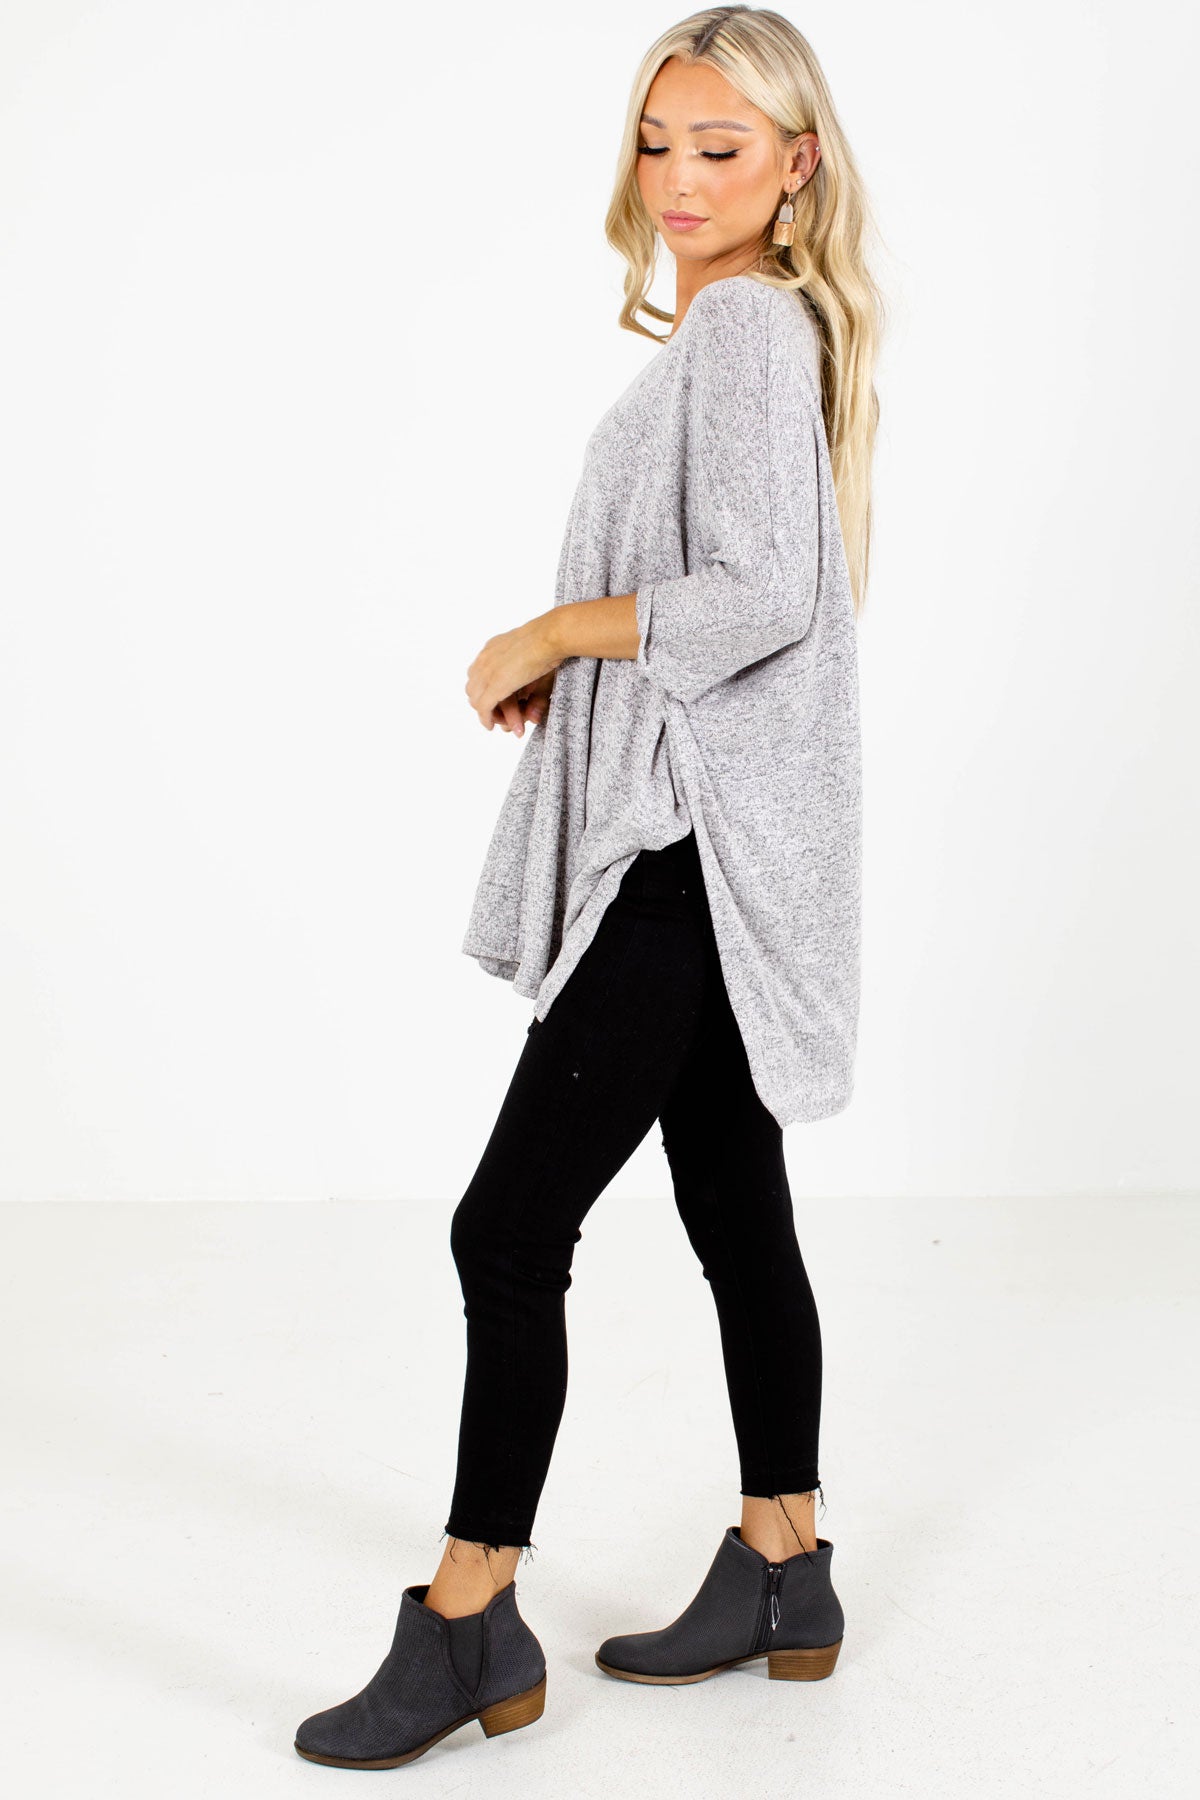 Gray Poncho Style Boutique Tops for Women